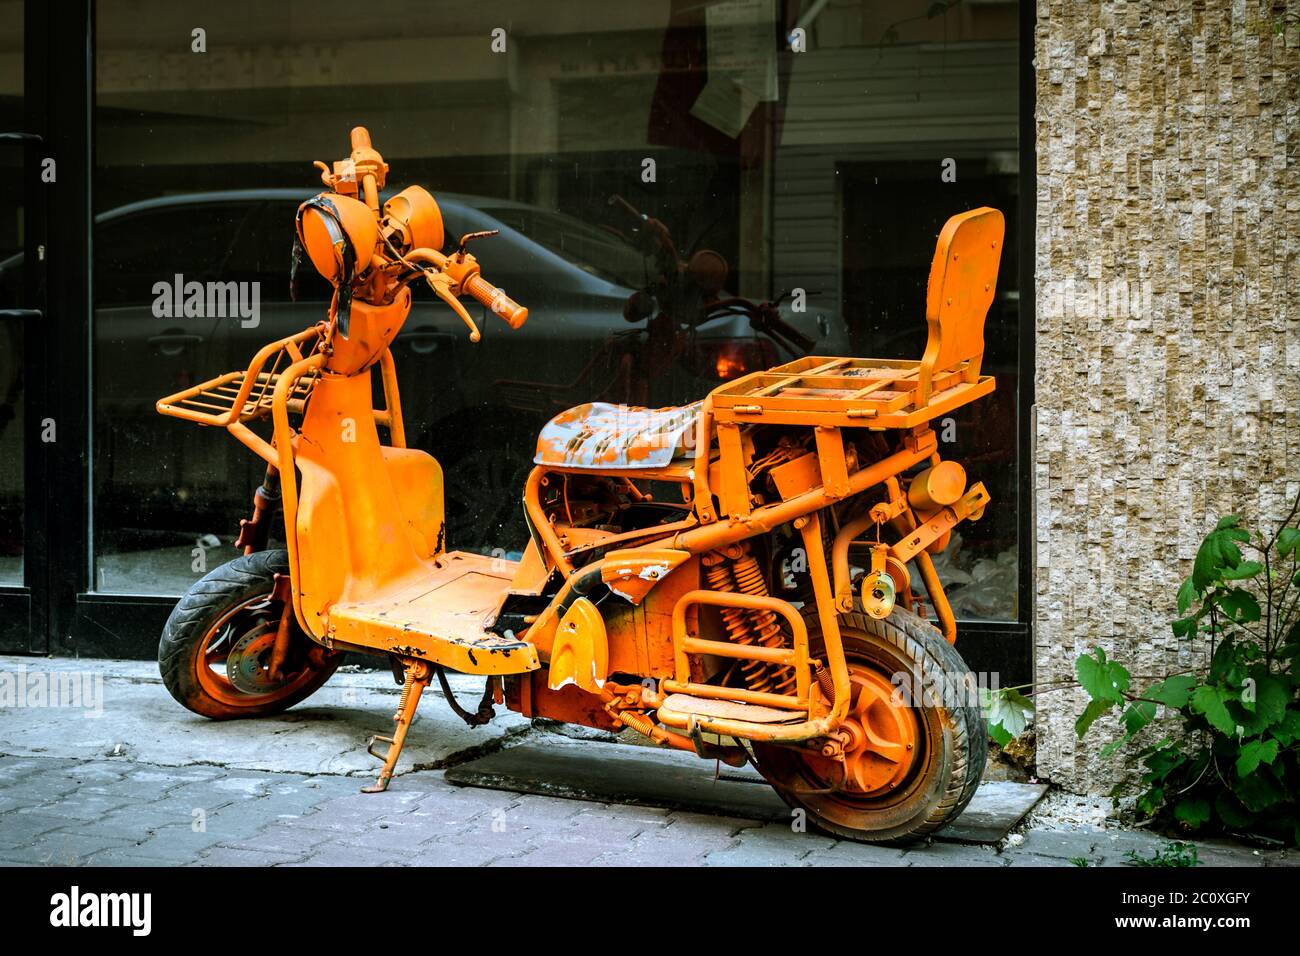 Turist anspore Mathis very shabby diy modified scooter, retro city bike, painted all orange,  phosphorous, stays as an offbeat object on the side of street Stock Photo -  Alamy